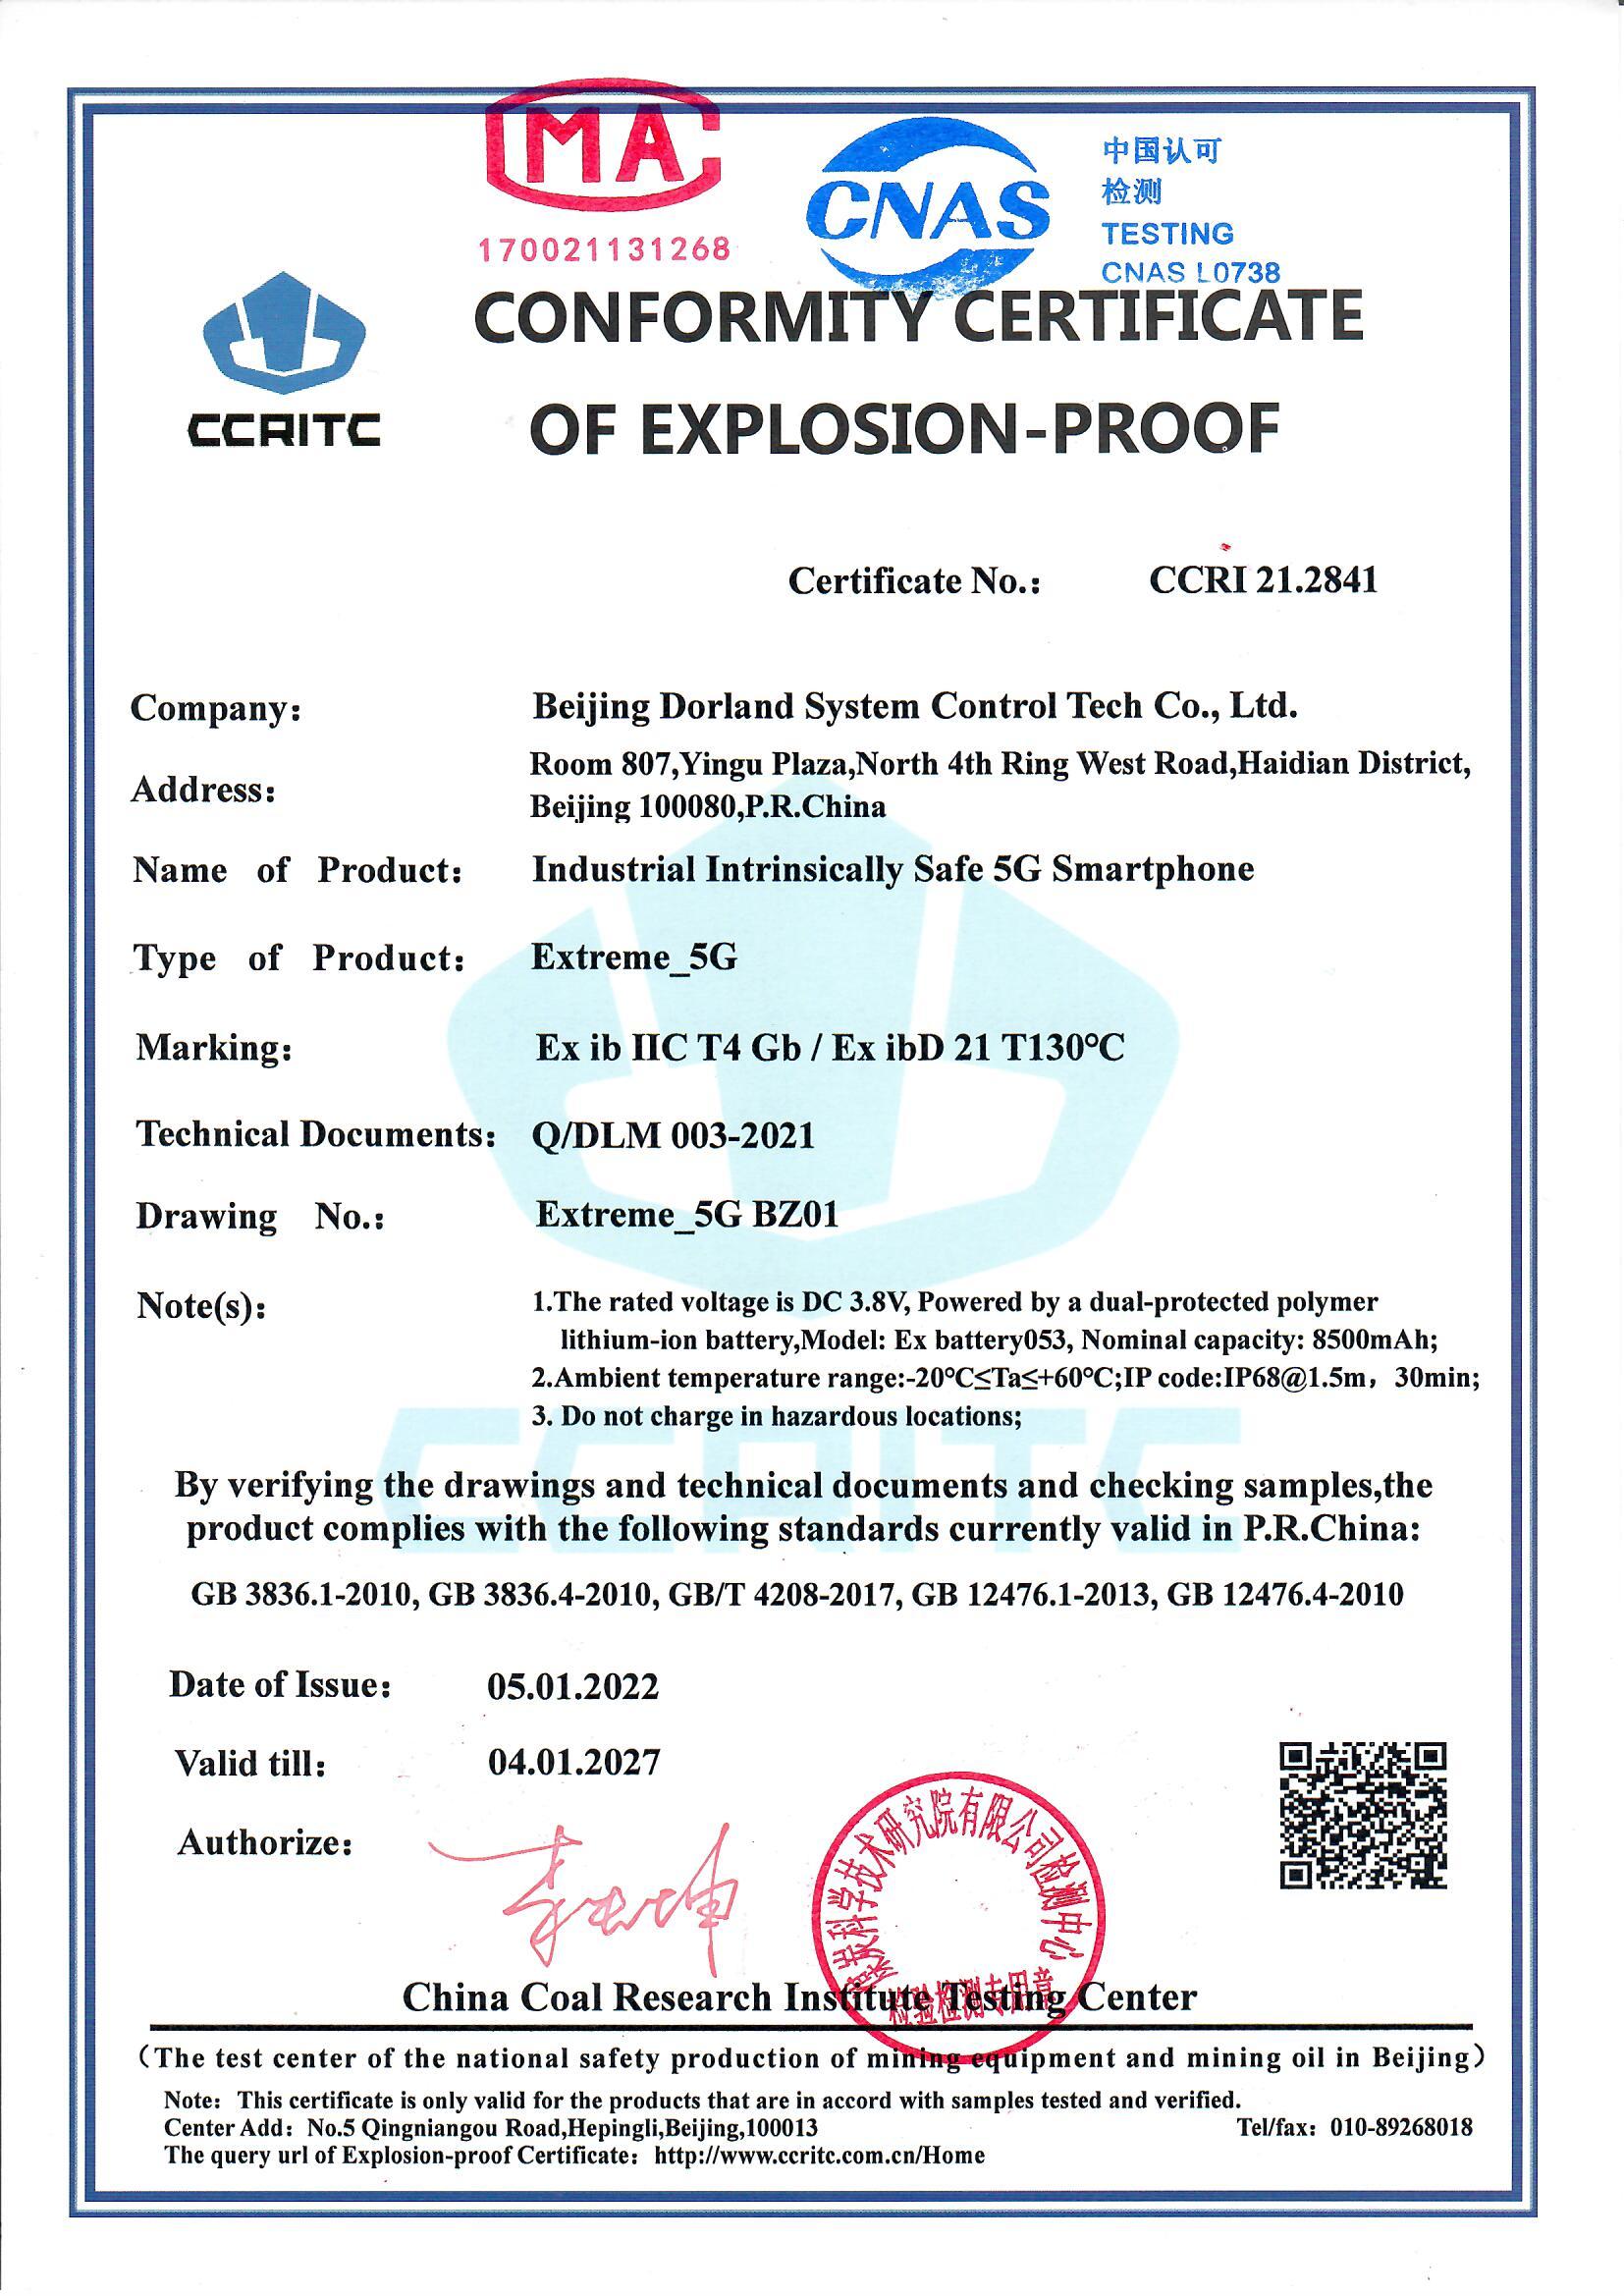 Extreme_5G Certificate